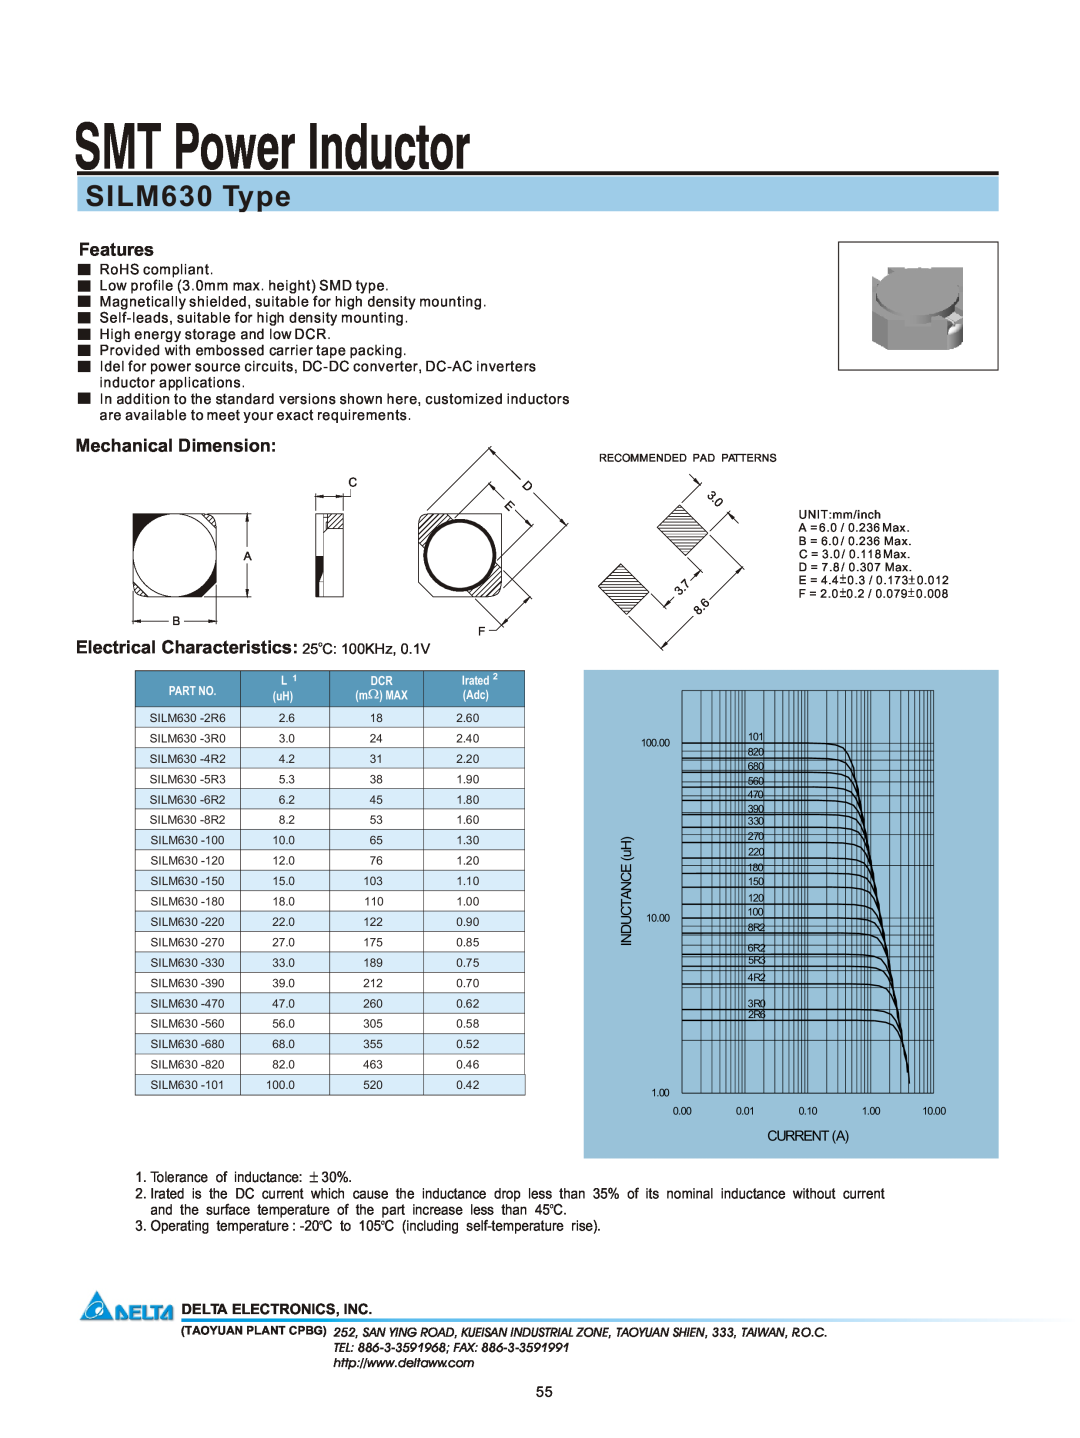 Delta Electronics manual SMT Power Inductor, SILM630 Type, Features, Mechanical Dimension, Delta Electronics, Inc 